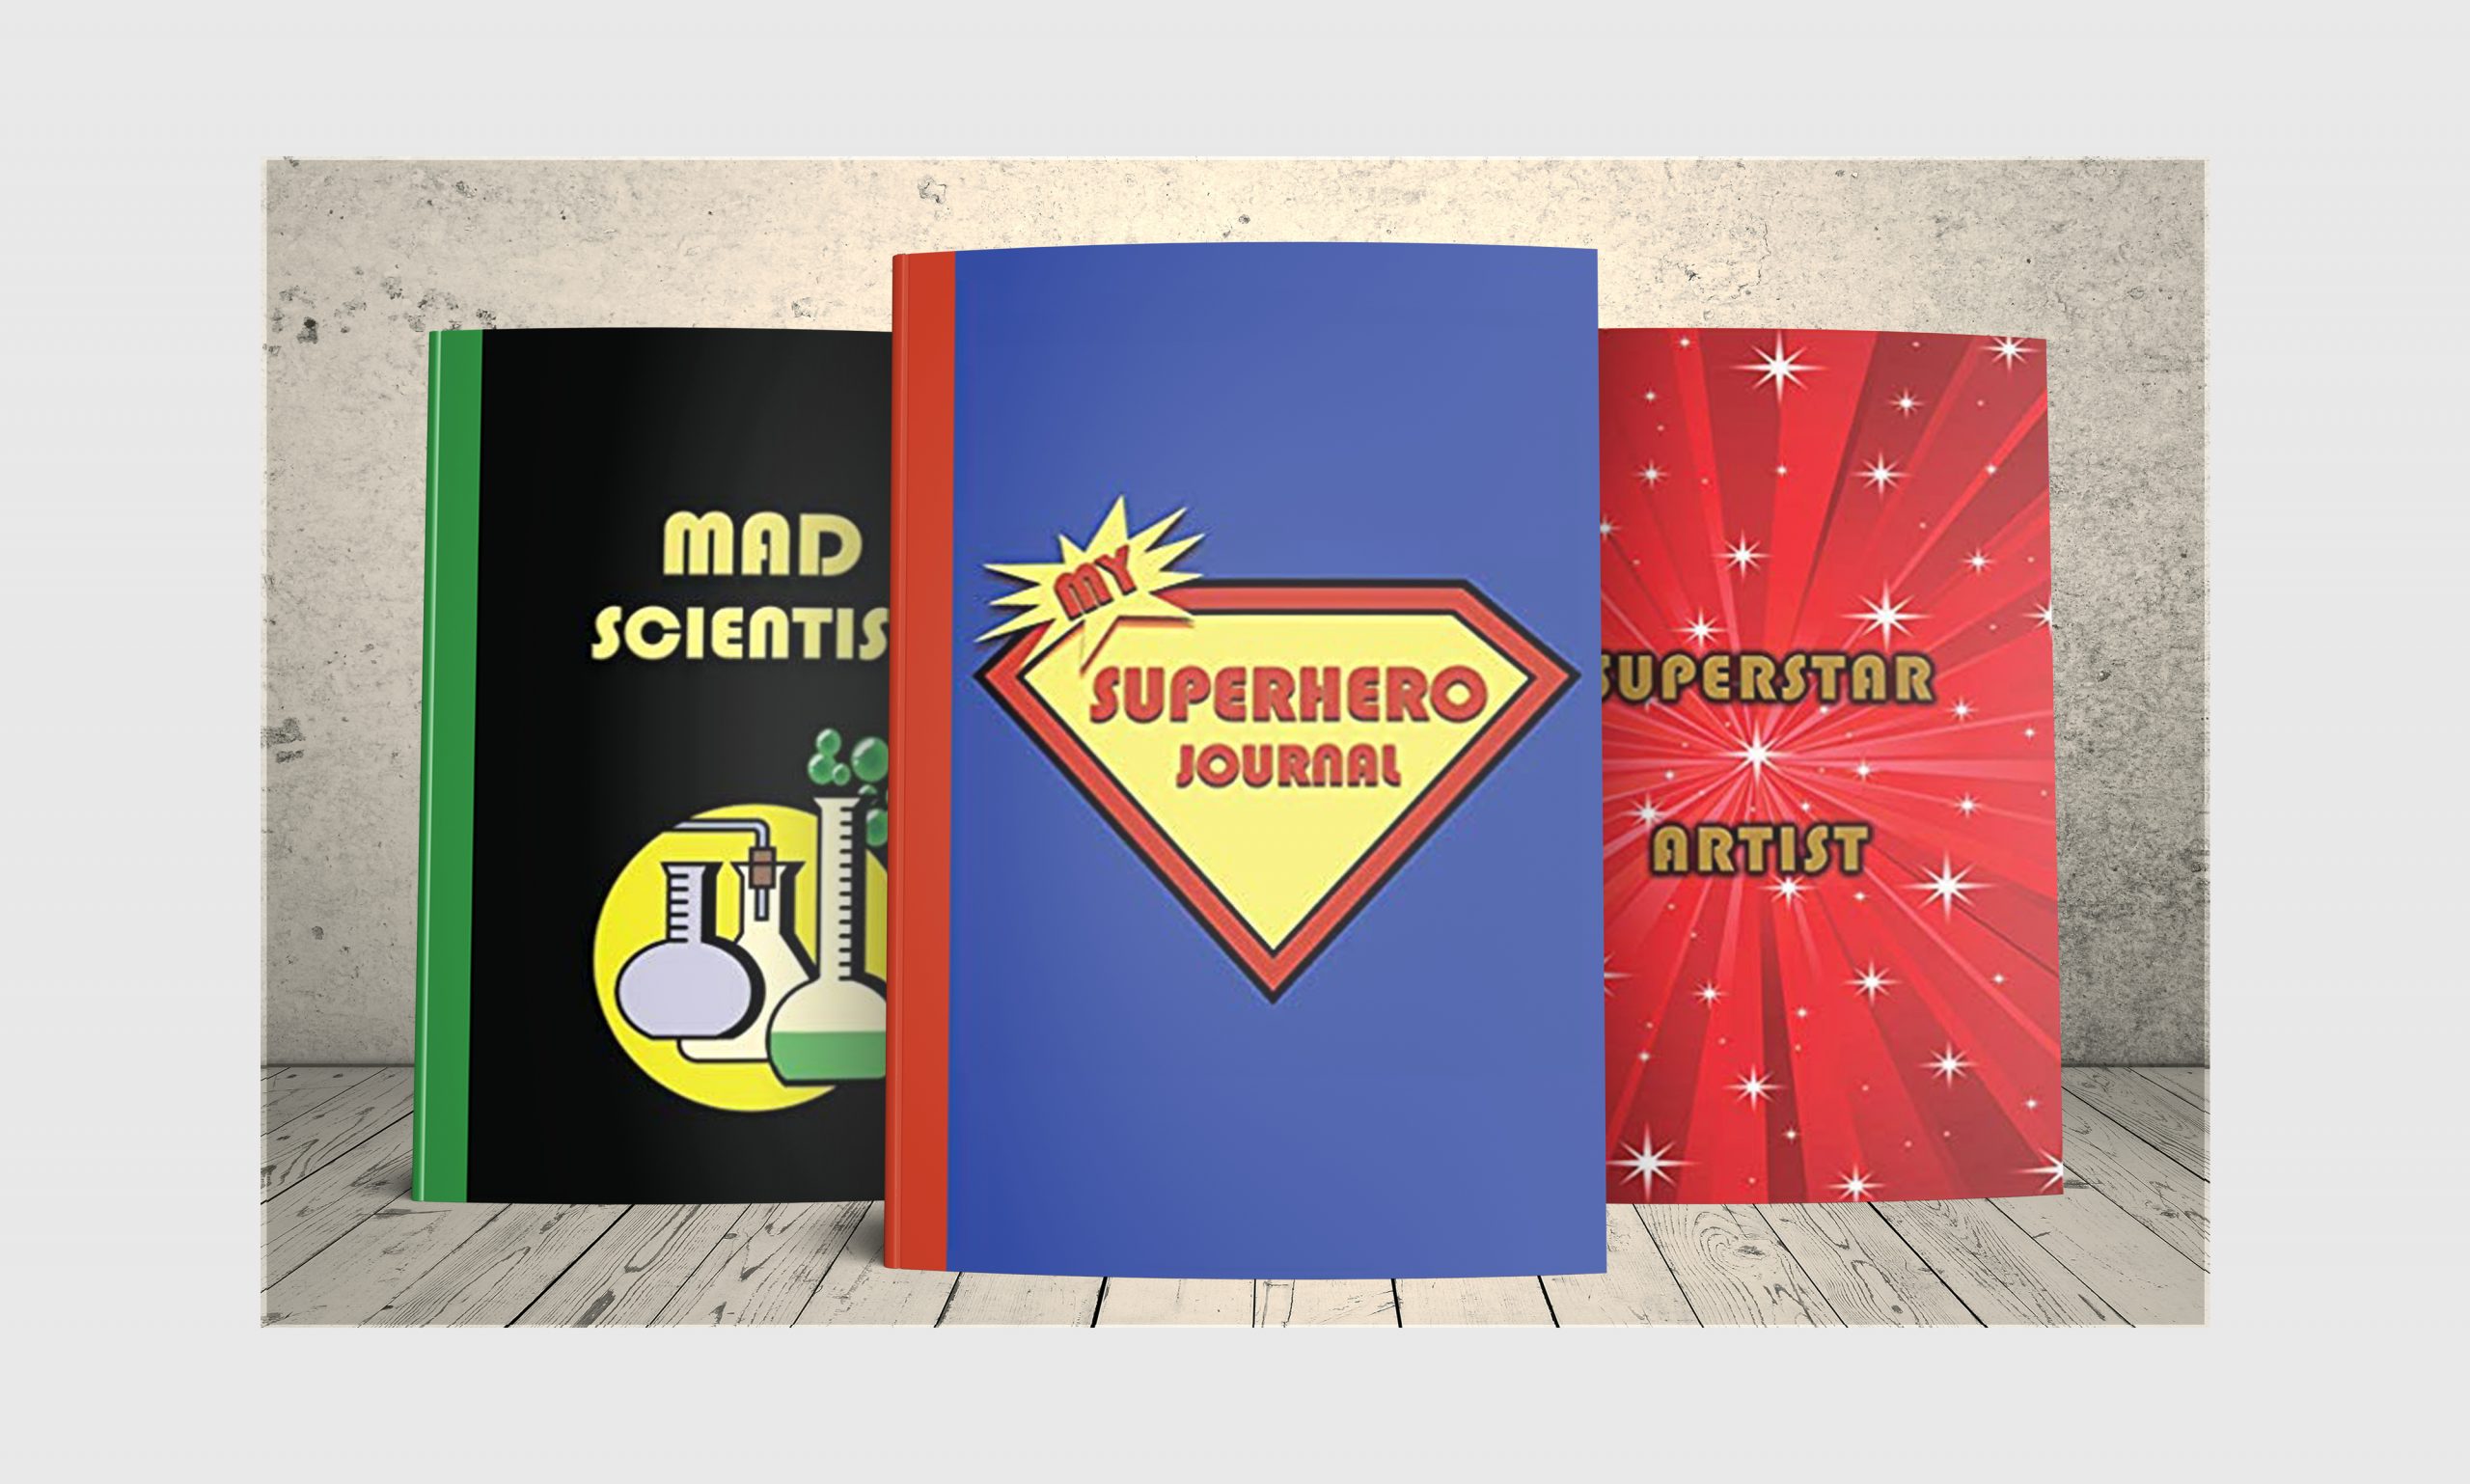 Three journals from Premise Content - My Superhero Journal in superman colors, Mad Scientist Journal in black, yellow and green and Superstar Artist in red with white stars.